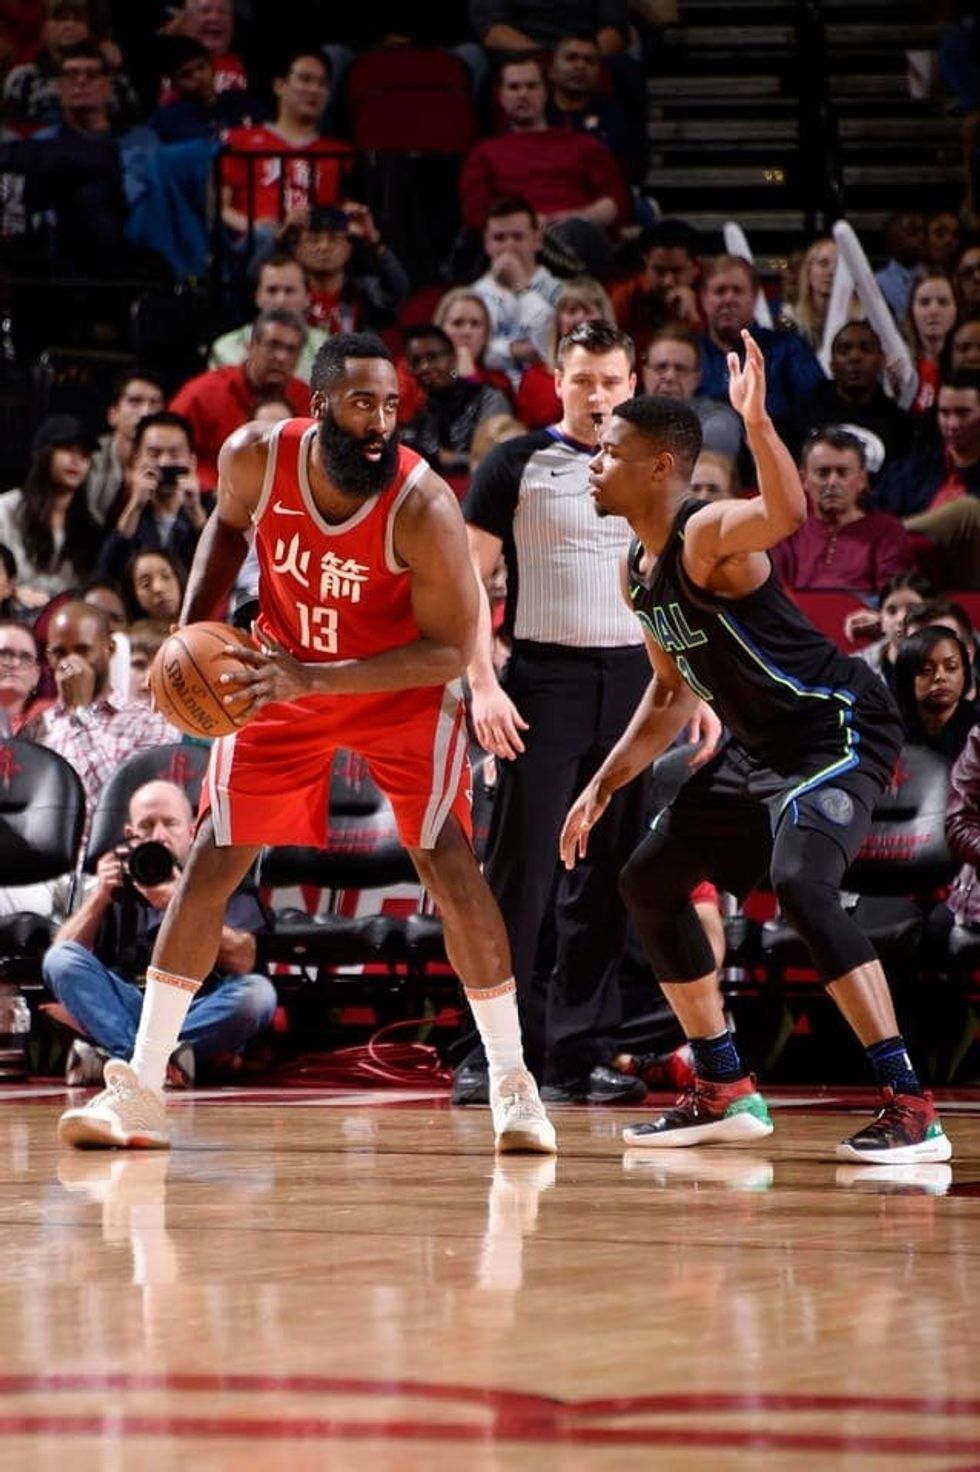 Charlie Pallilo: Rockets should make quick work of the T Wolves